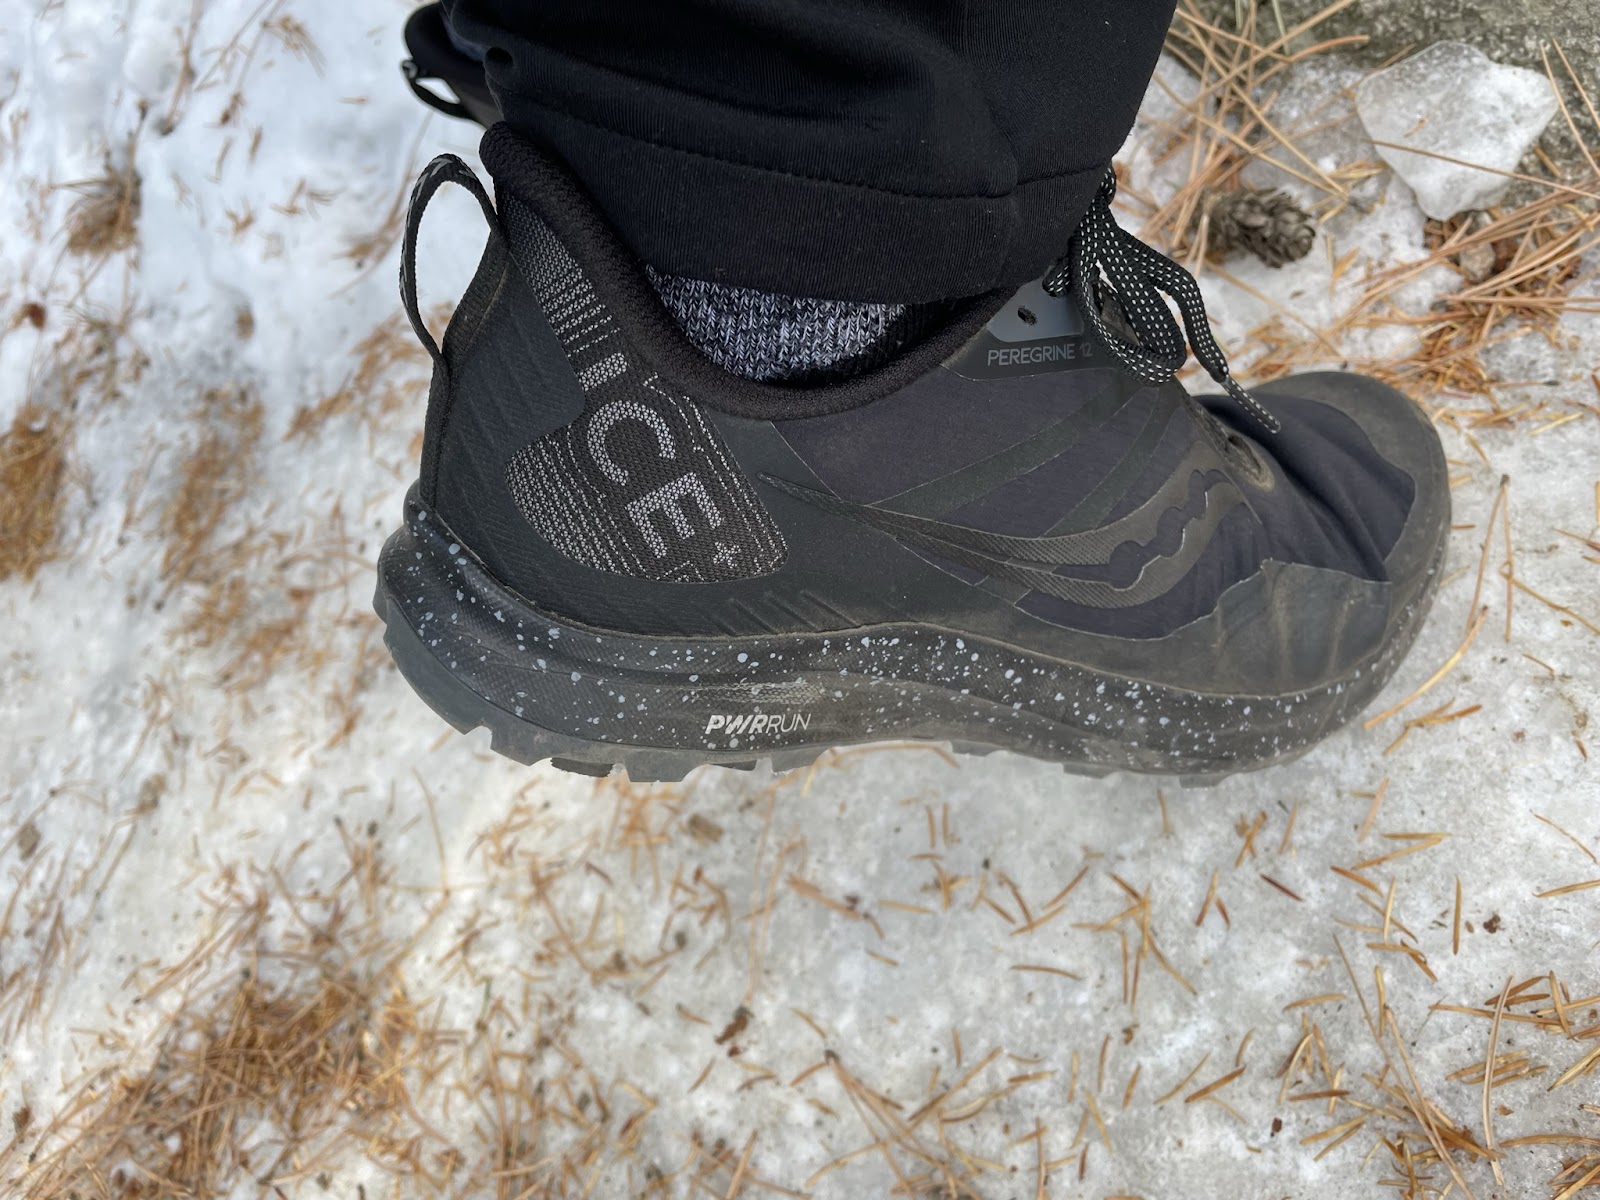 Road Trail Run: Saucony Peregrine Ice+3 Review 5 Comparisons